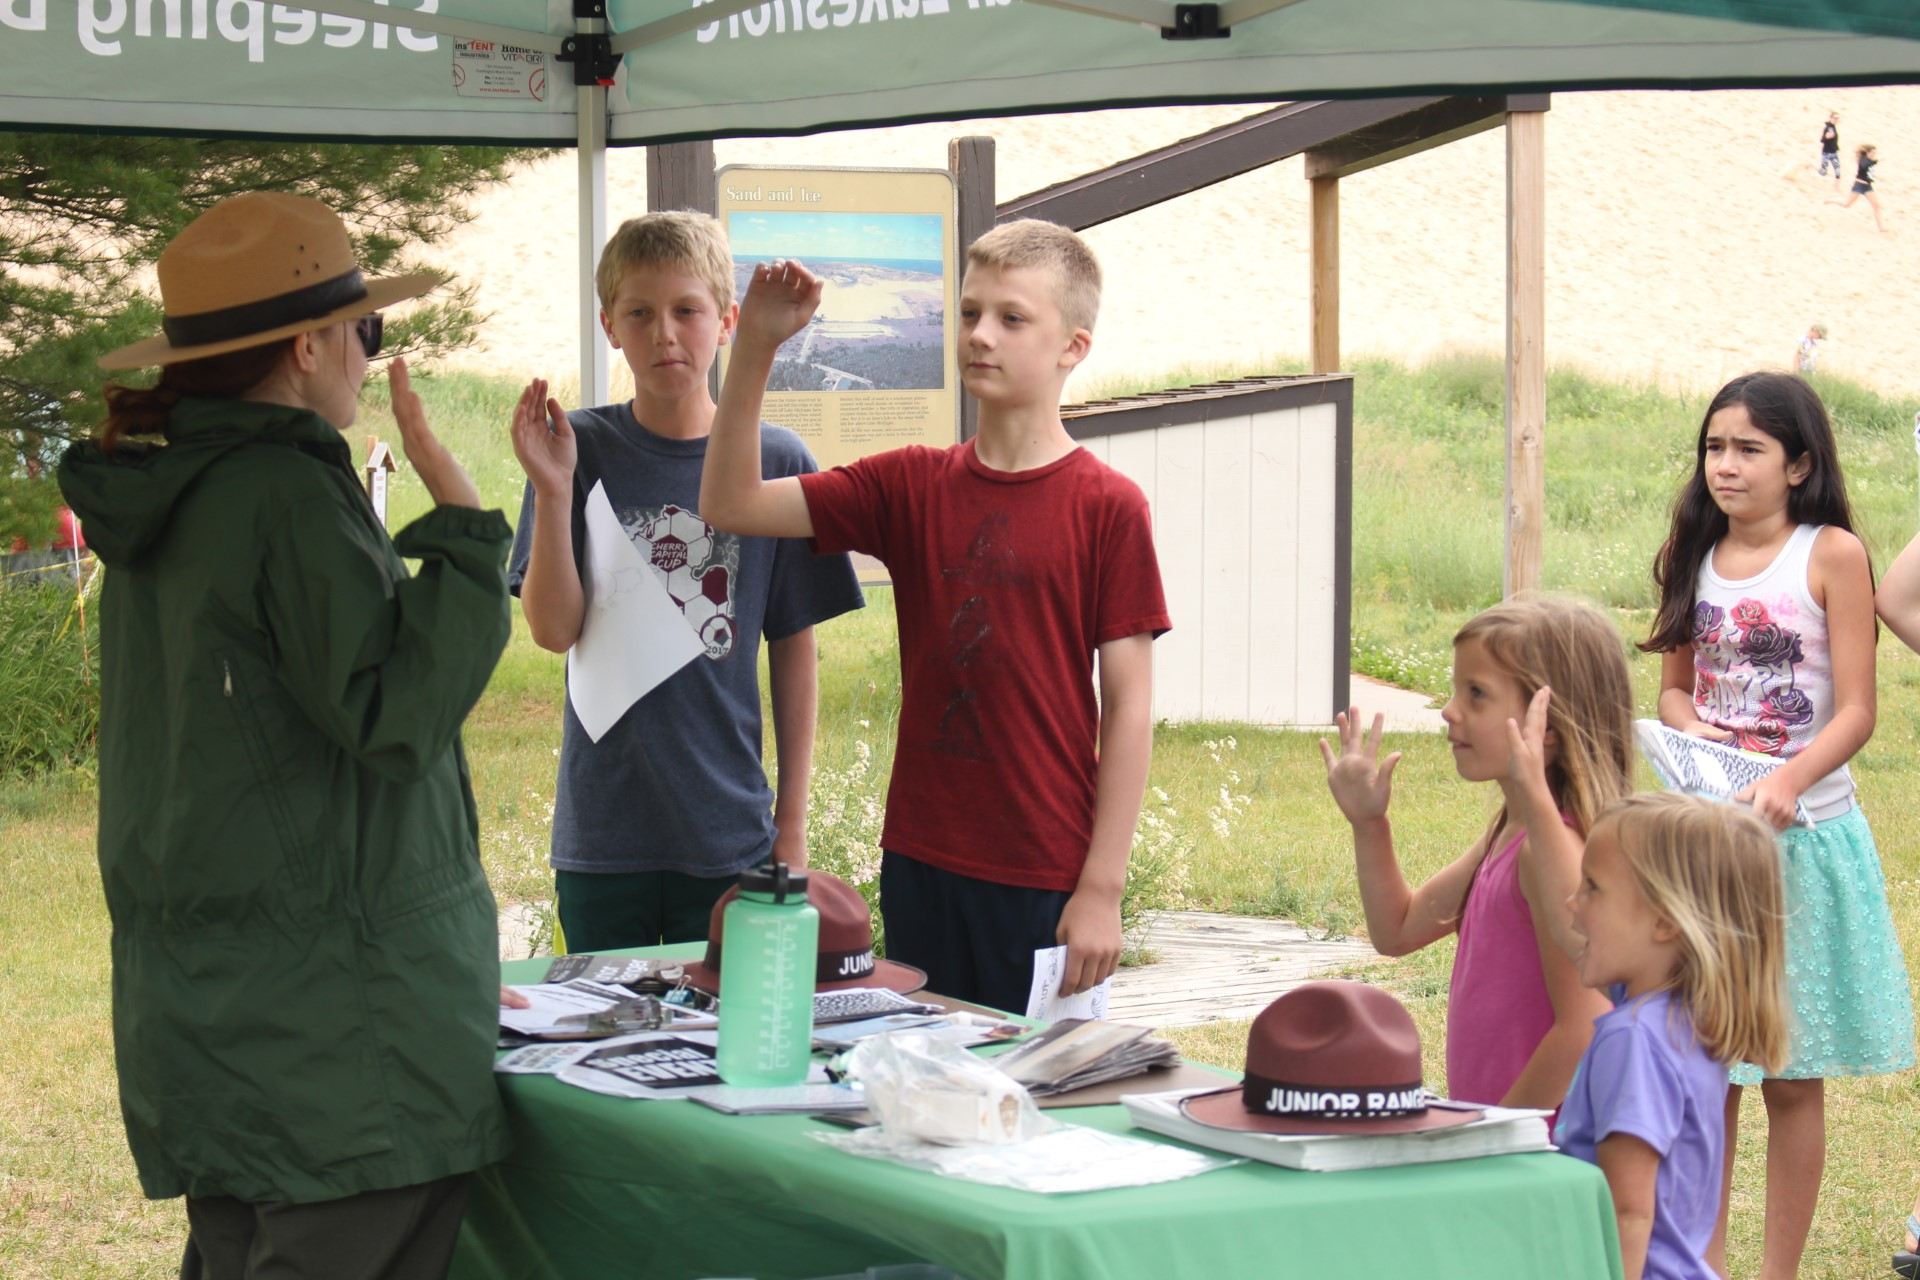 A park ranger swears in four Junior Rangers at the Dune Climb while a girl watches in the background.